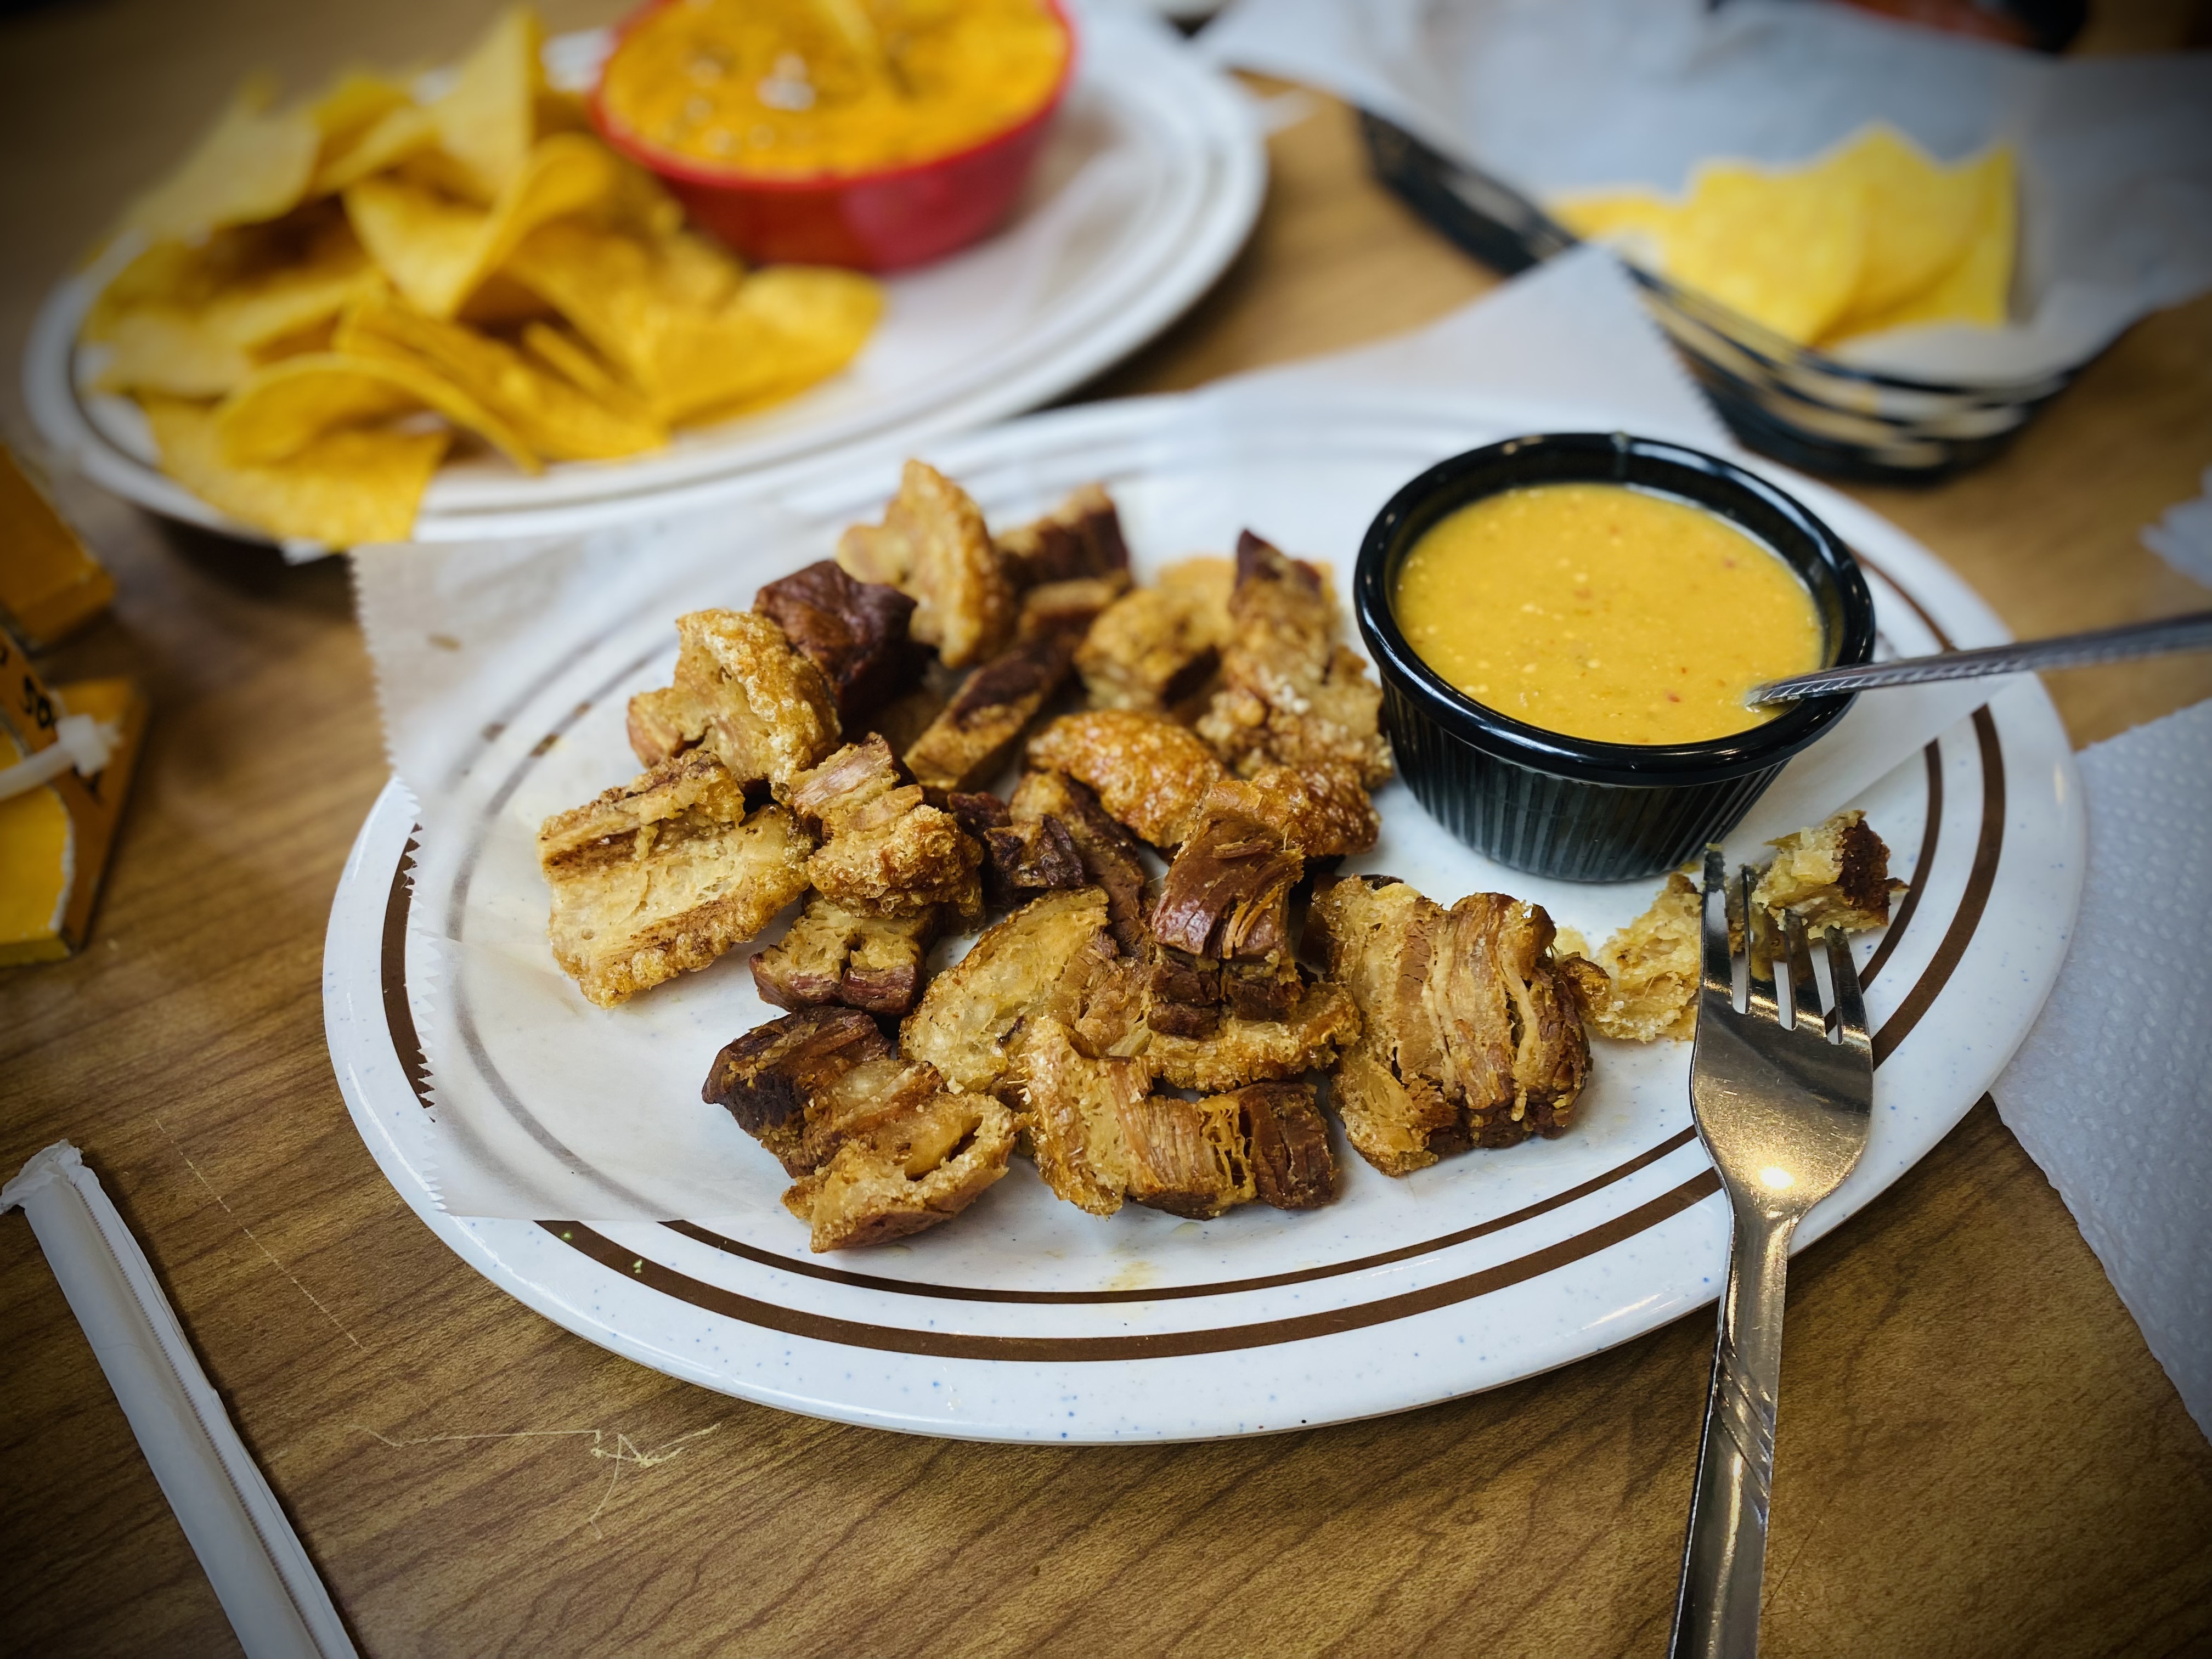 The chicharrones from La Jalisciense Supermercado Y Taqueria in southwest Detroit, Michigan served with a fiery peanut sauce.